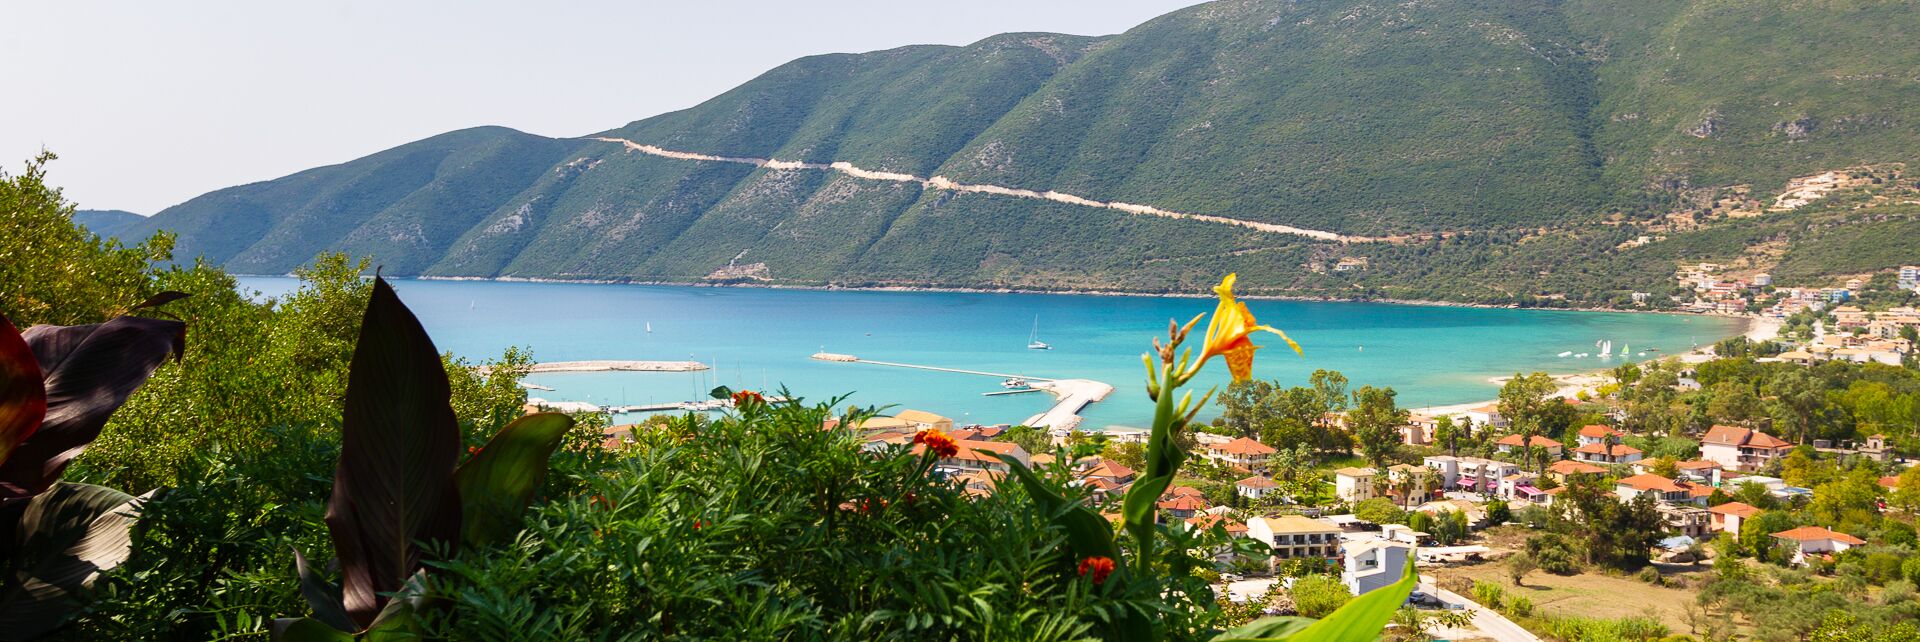 Vasiliki Greece. For relaxed holidays. Surfing, hiking, cycling, good food is part of it.